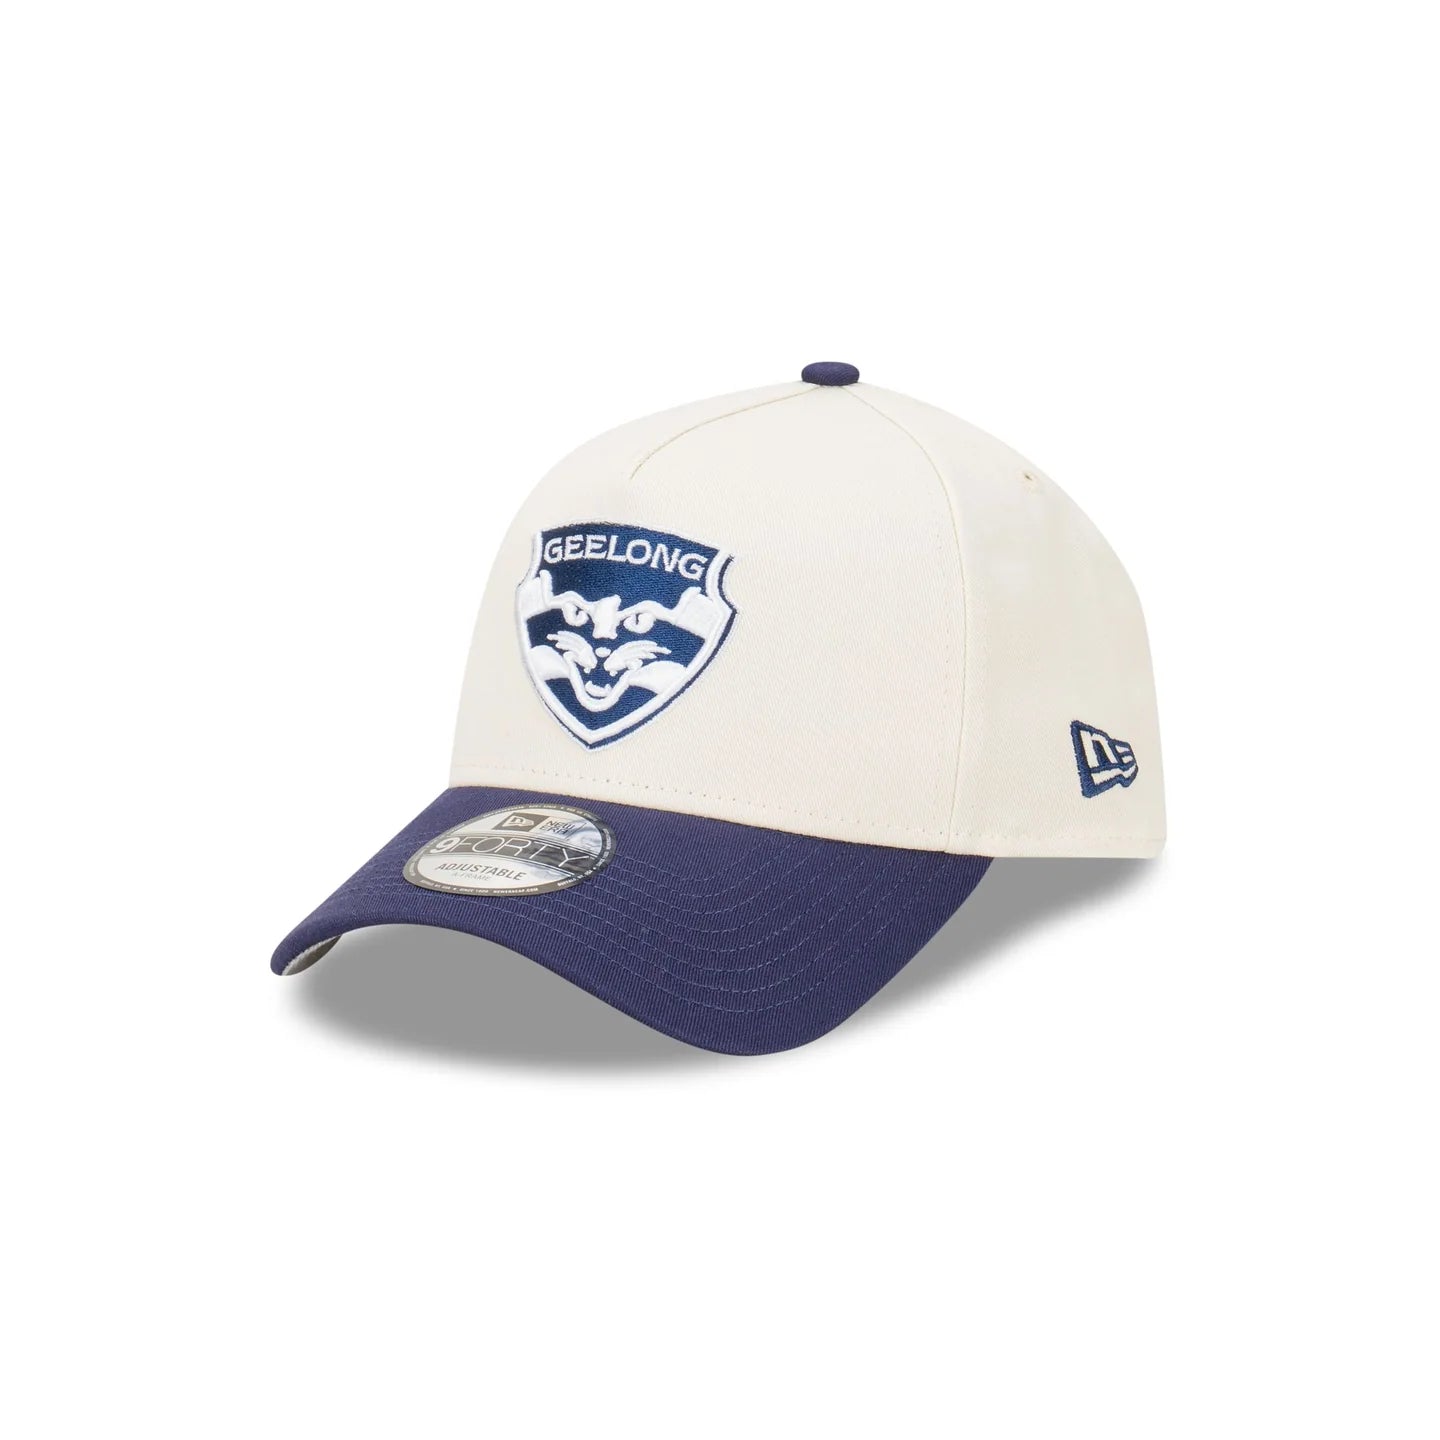 Geelong Cats Hat - 2-Tone Chrome Navy 9Forty A-Frame AFL Snapback Cap - New Era